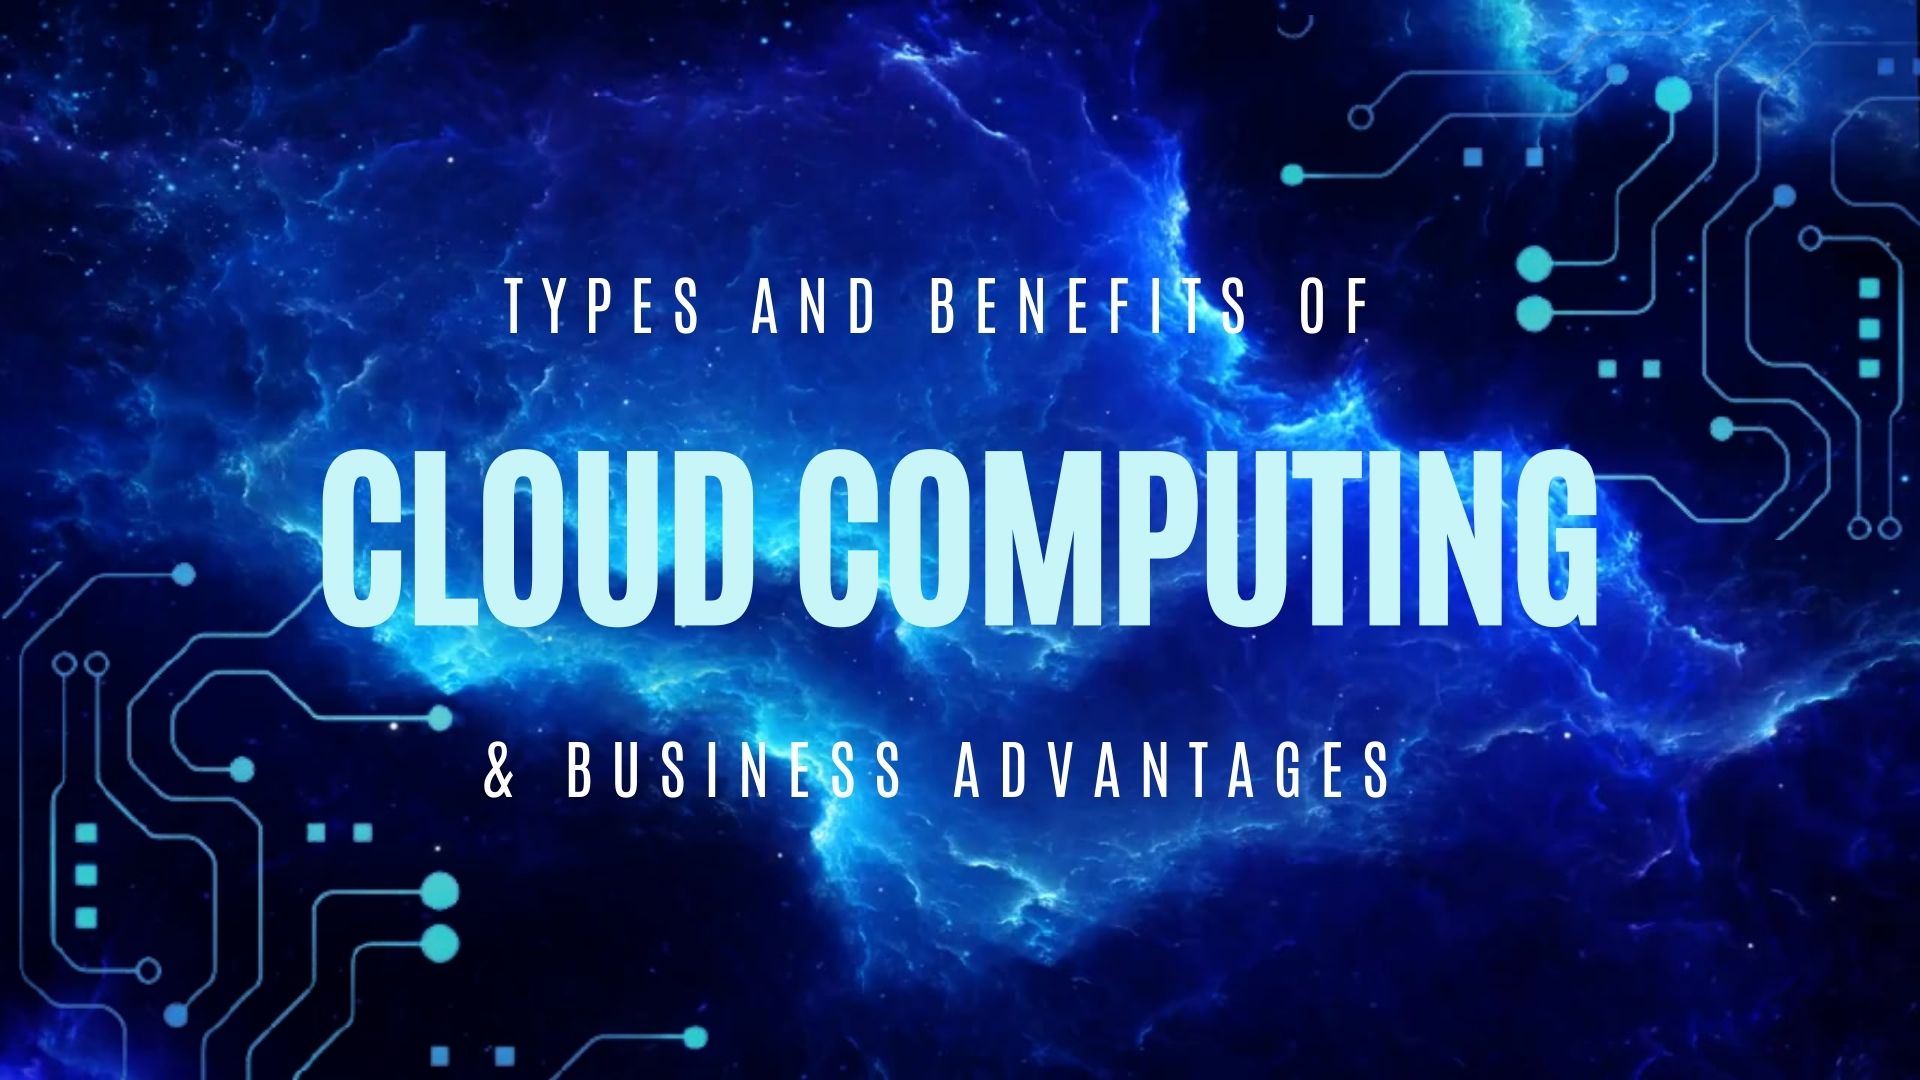 Cloud Computing: Types, Benefits, and Business Advantages